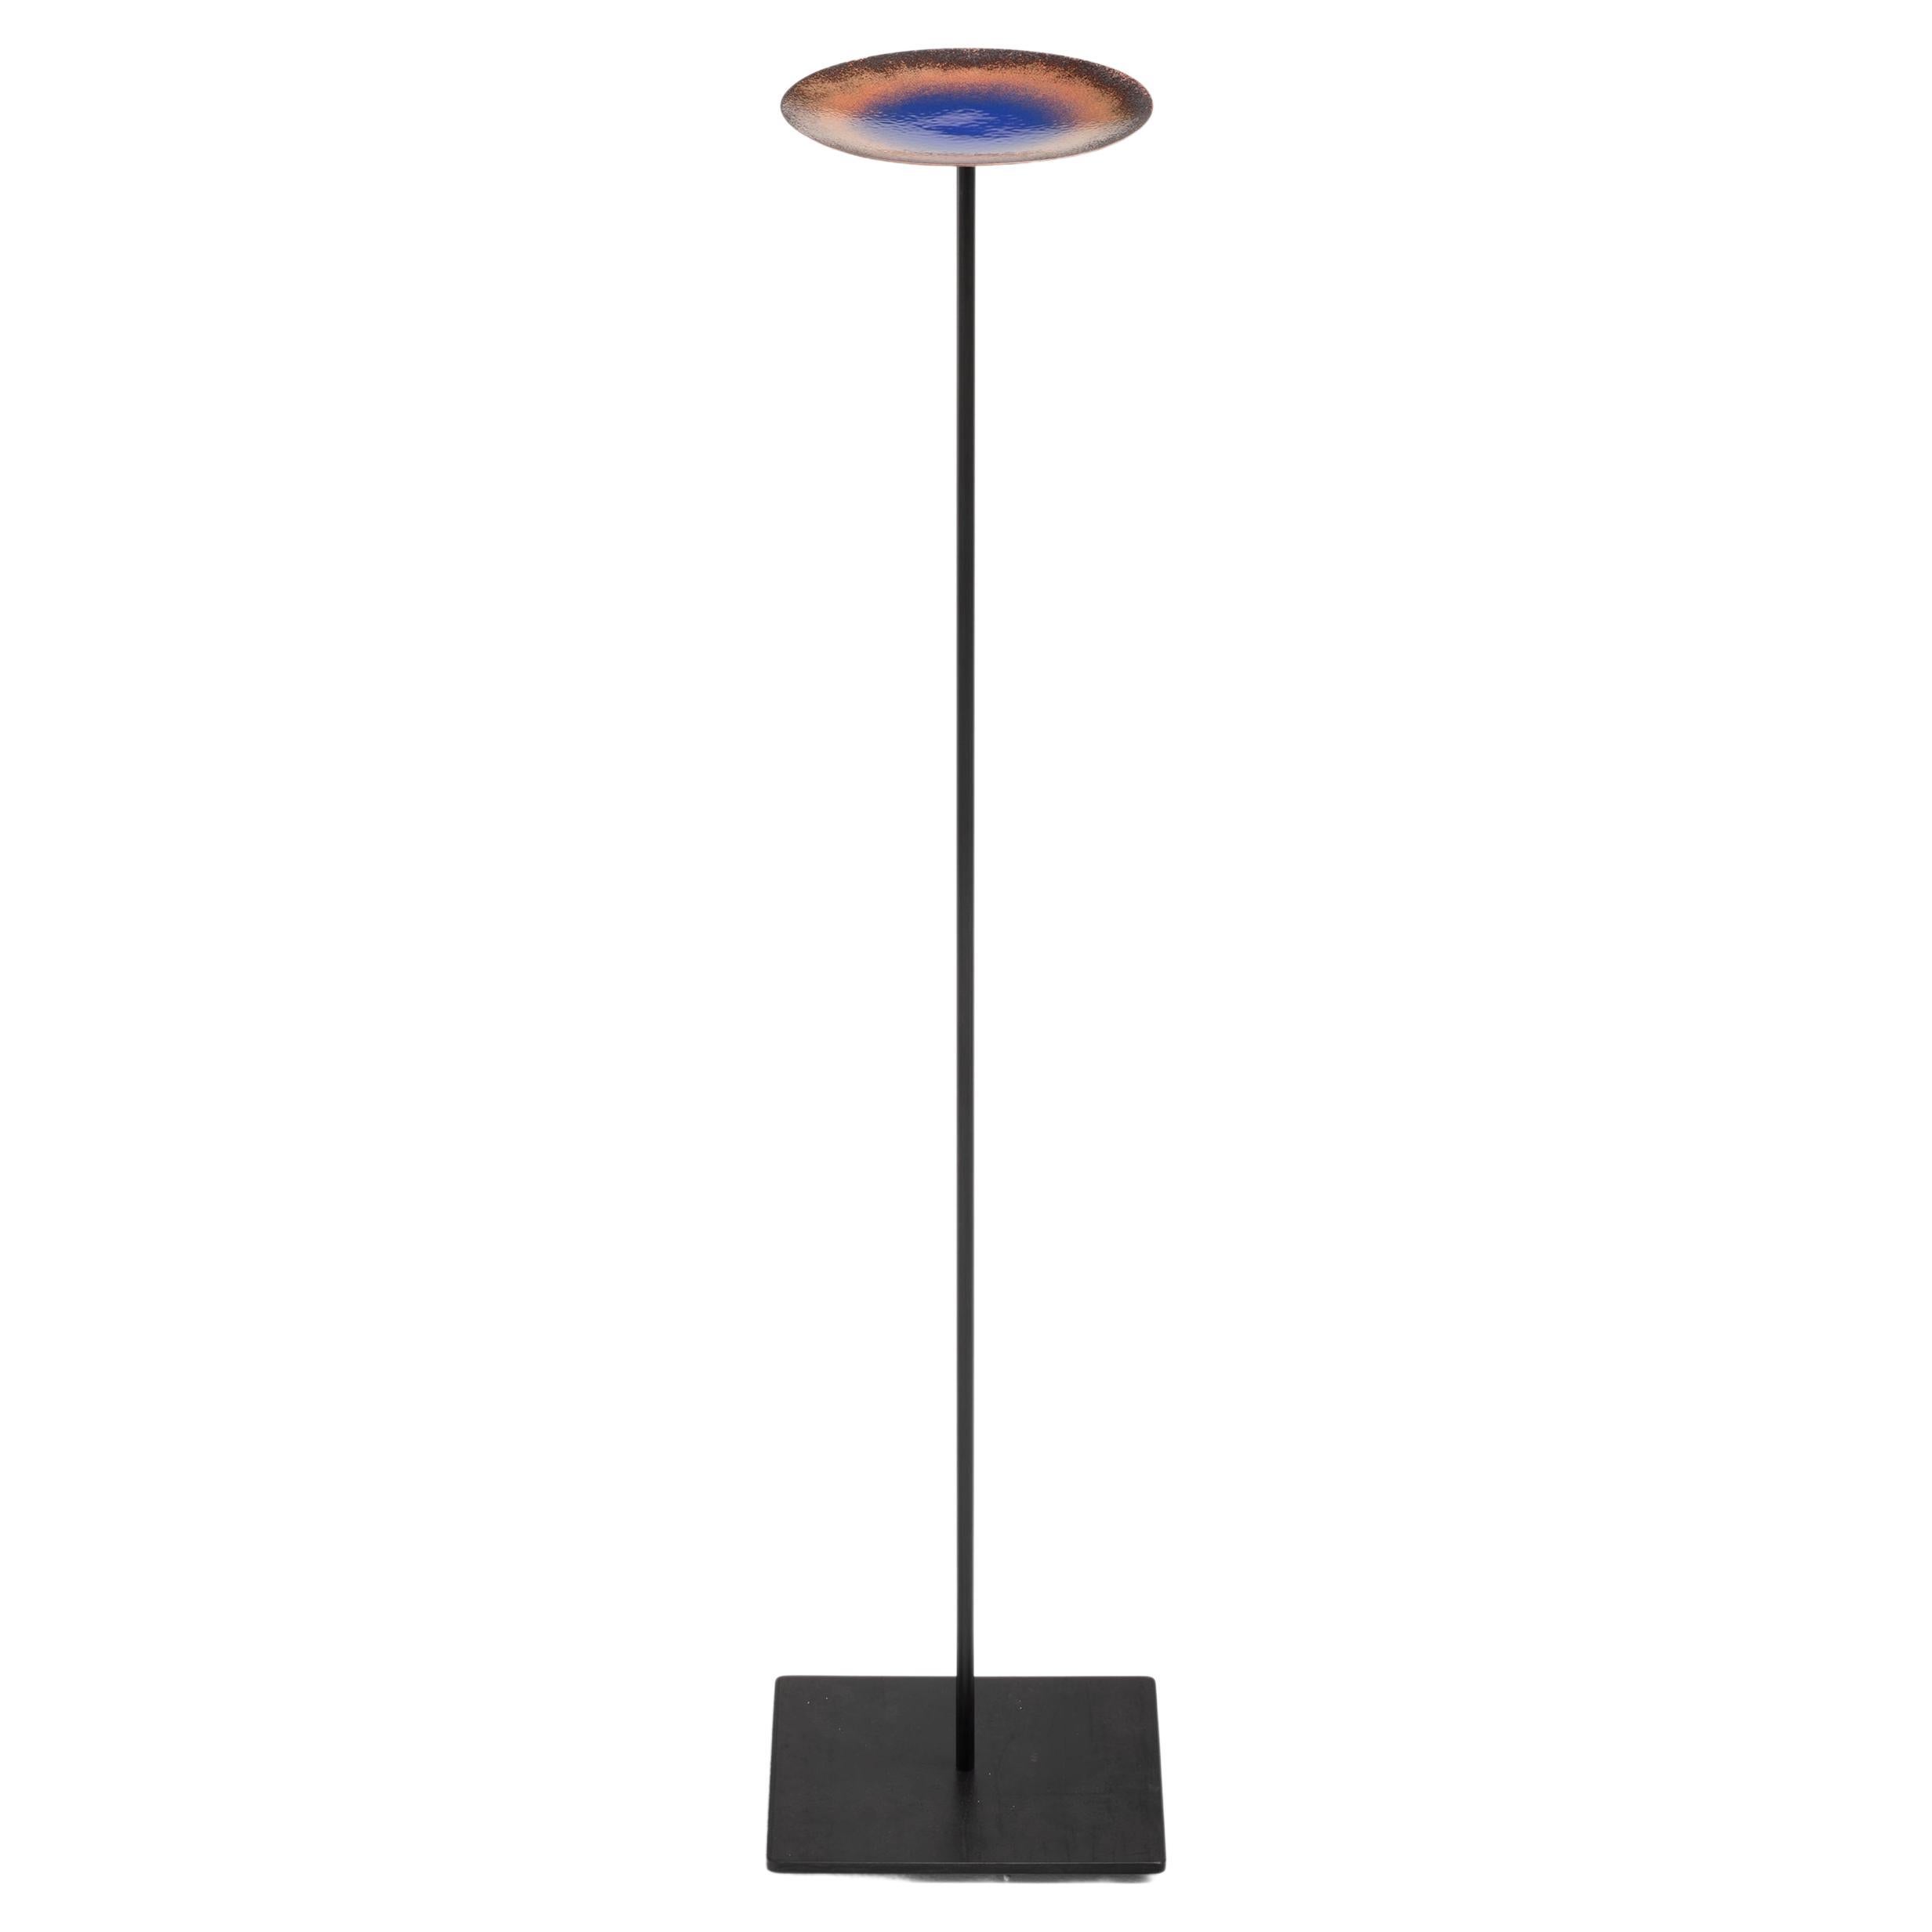 Enameled Specola - Dish on Floor Stand - Fire Enamel on Copper For Sale